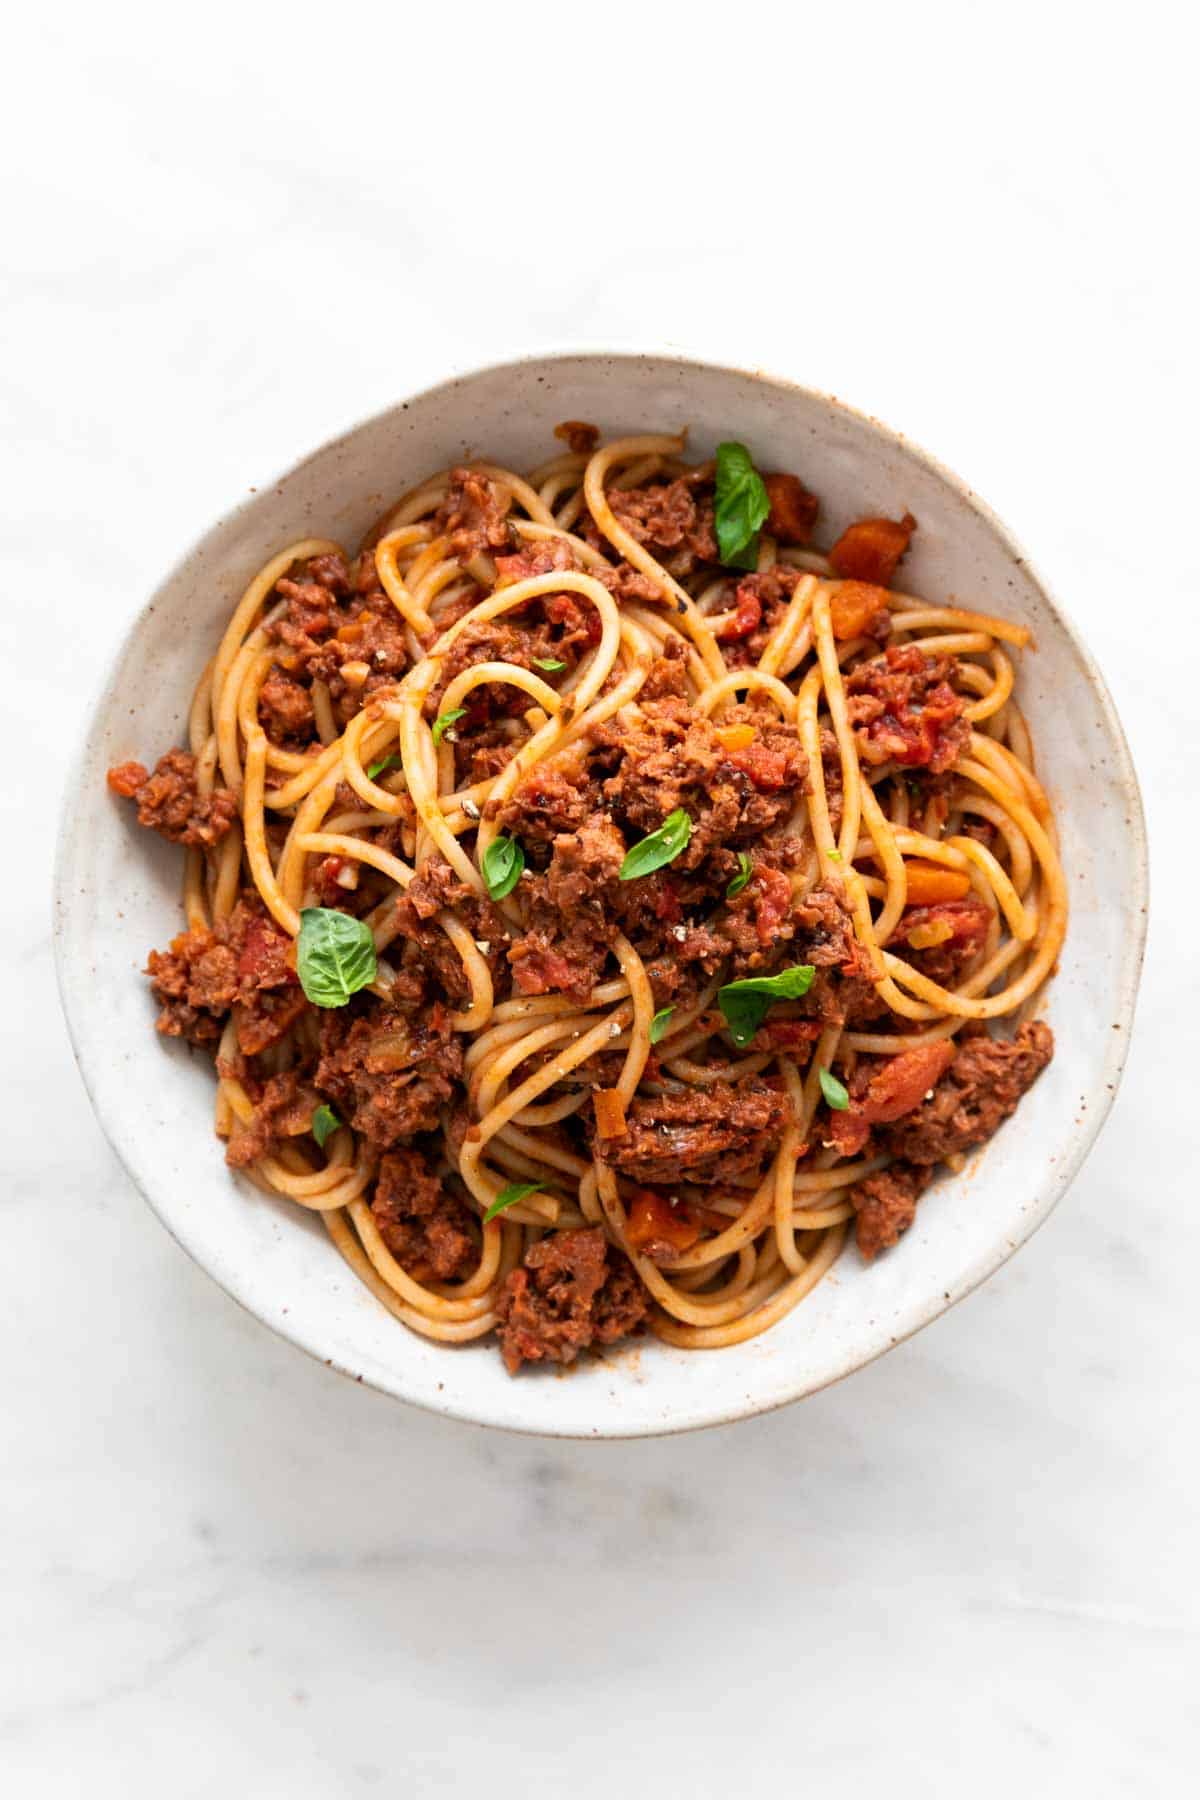 Vegan bolognese sauce mixed with spaghetti in a bowl.